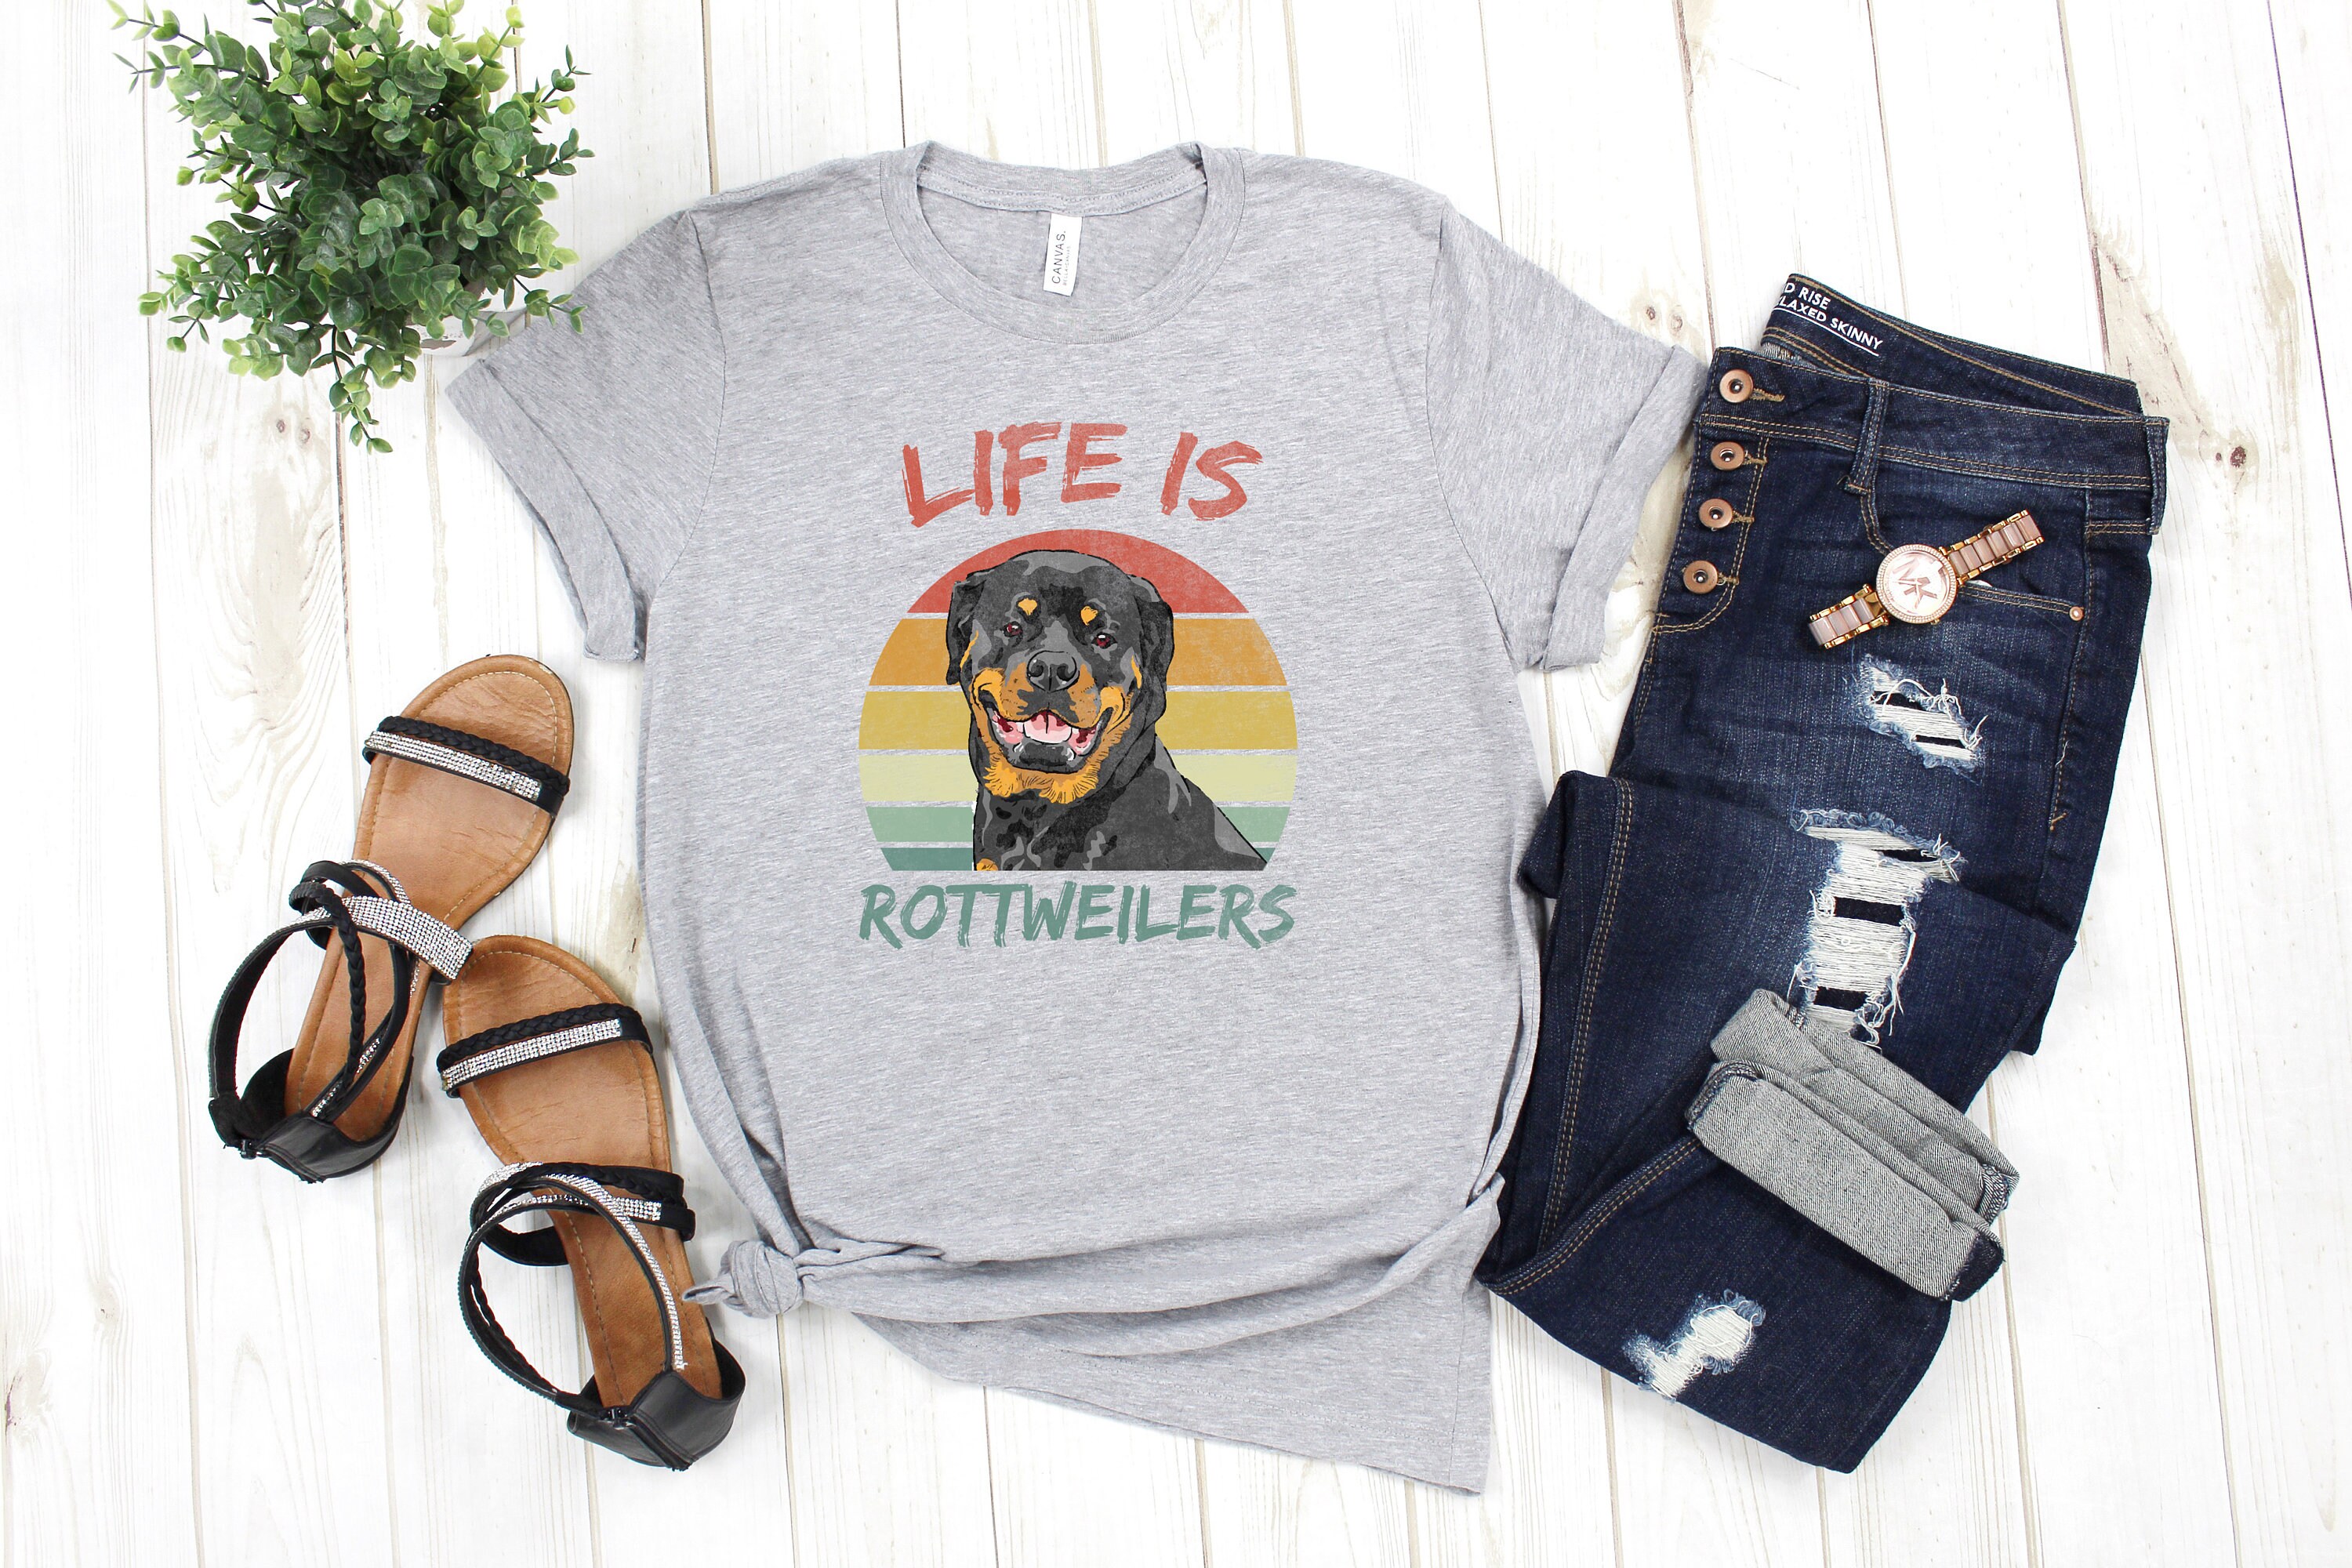 Discover Life s Rottweilers T-Shirt - Rottweiler Retriever Tee - Gift For Animal Lovers - Rottweiler Dog Lover Tee -Gift For Rottweiler Owner Shirt